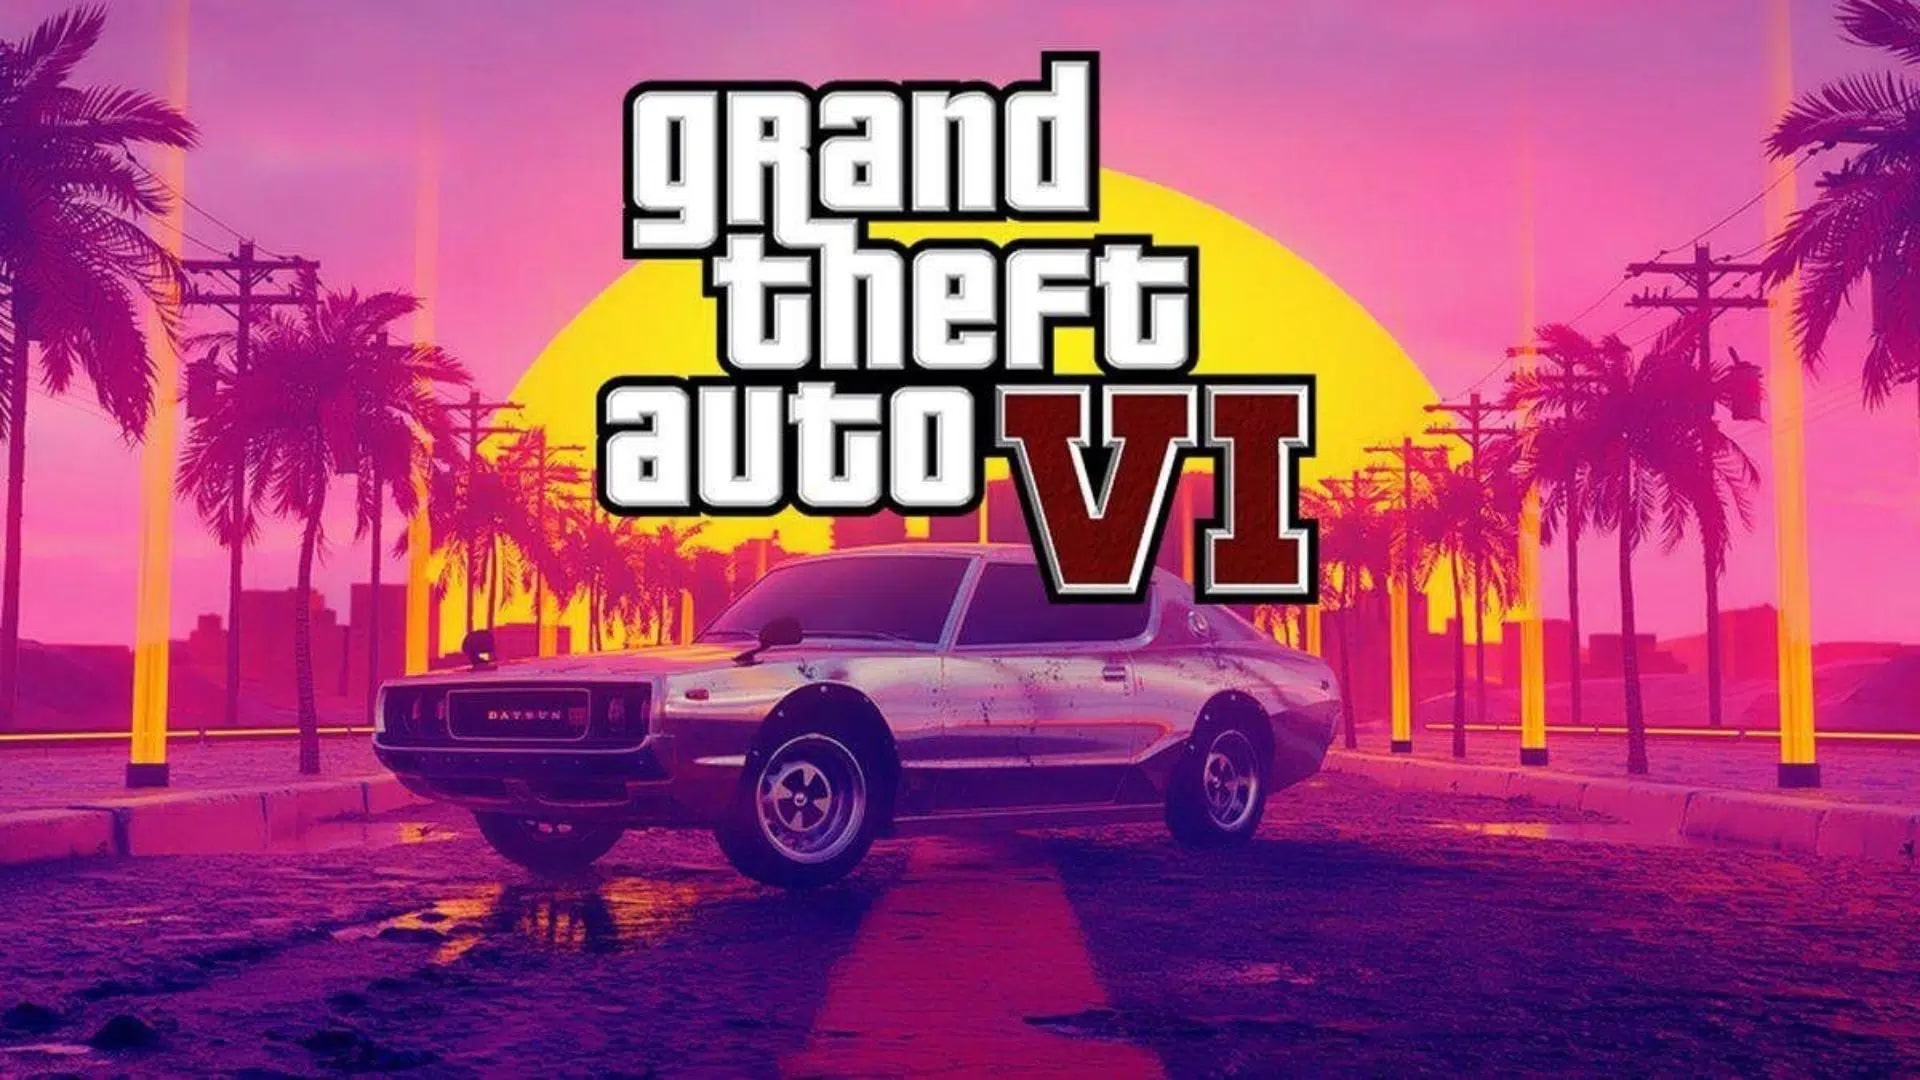 breaking-news-grand-theft-auto-vi-trailer-leaks-day-early-rockstar-yanks-footage